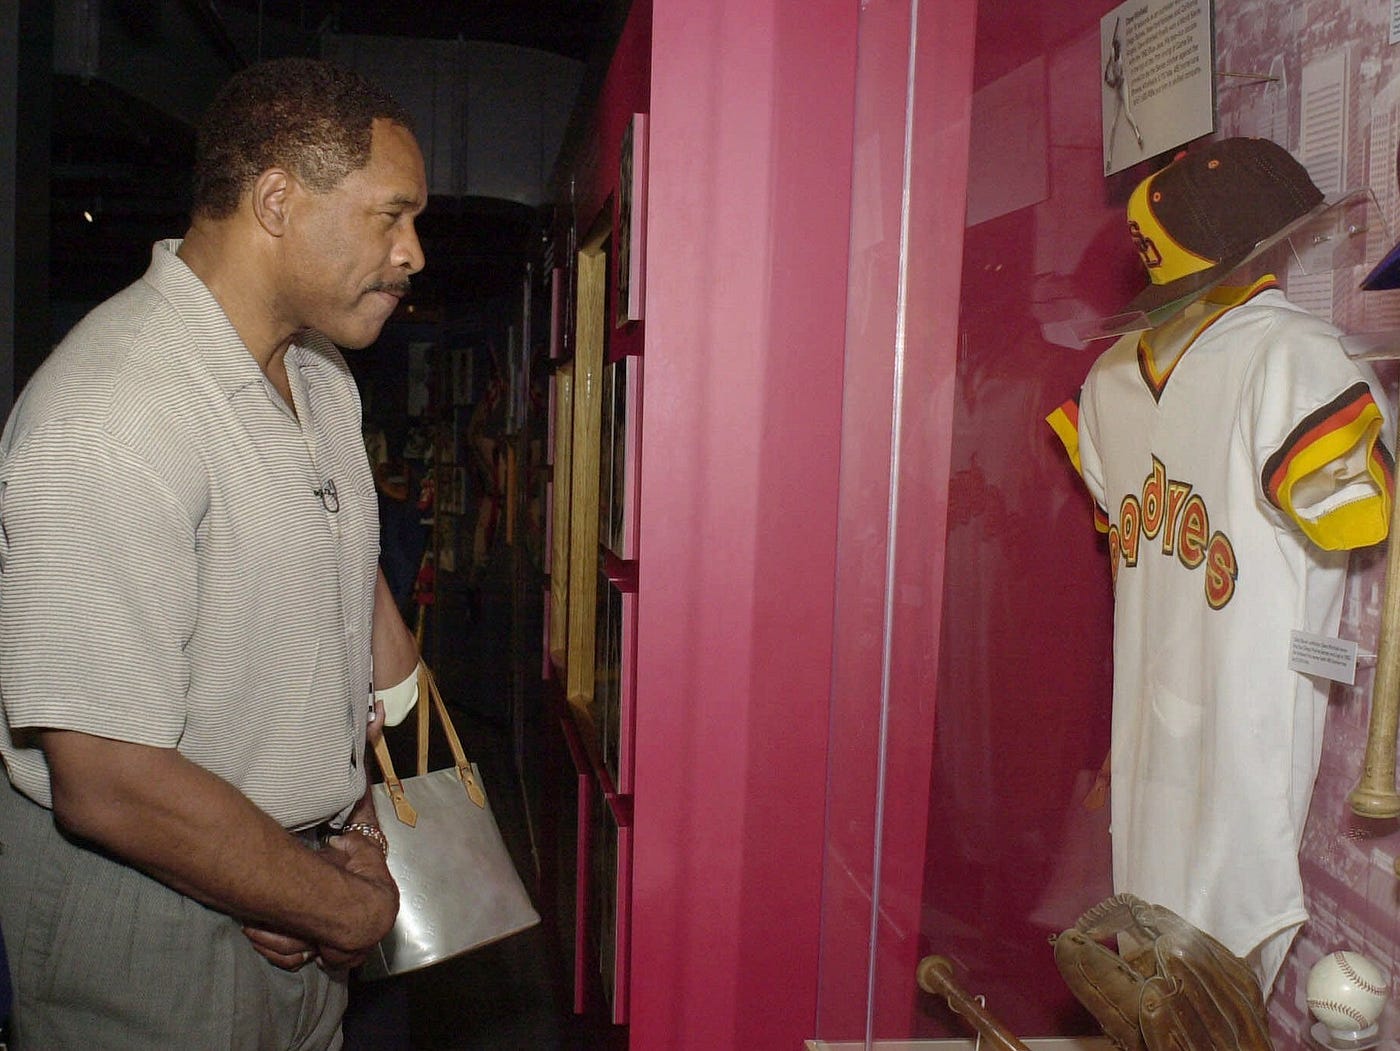 About Winfield – Dave Winfield Hall of Fame